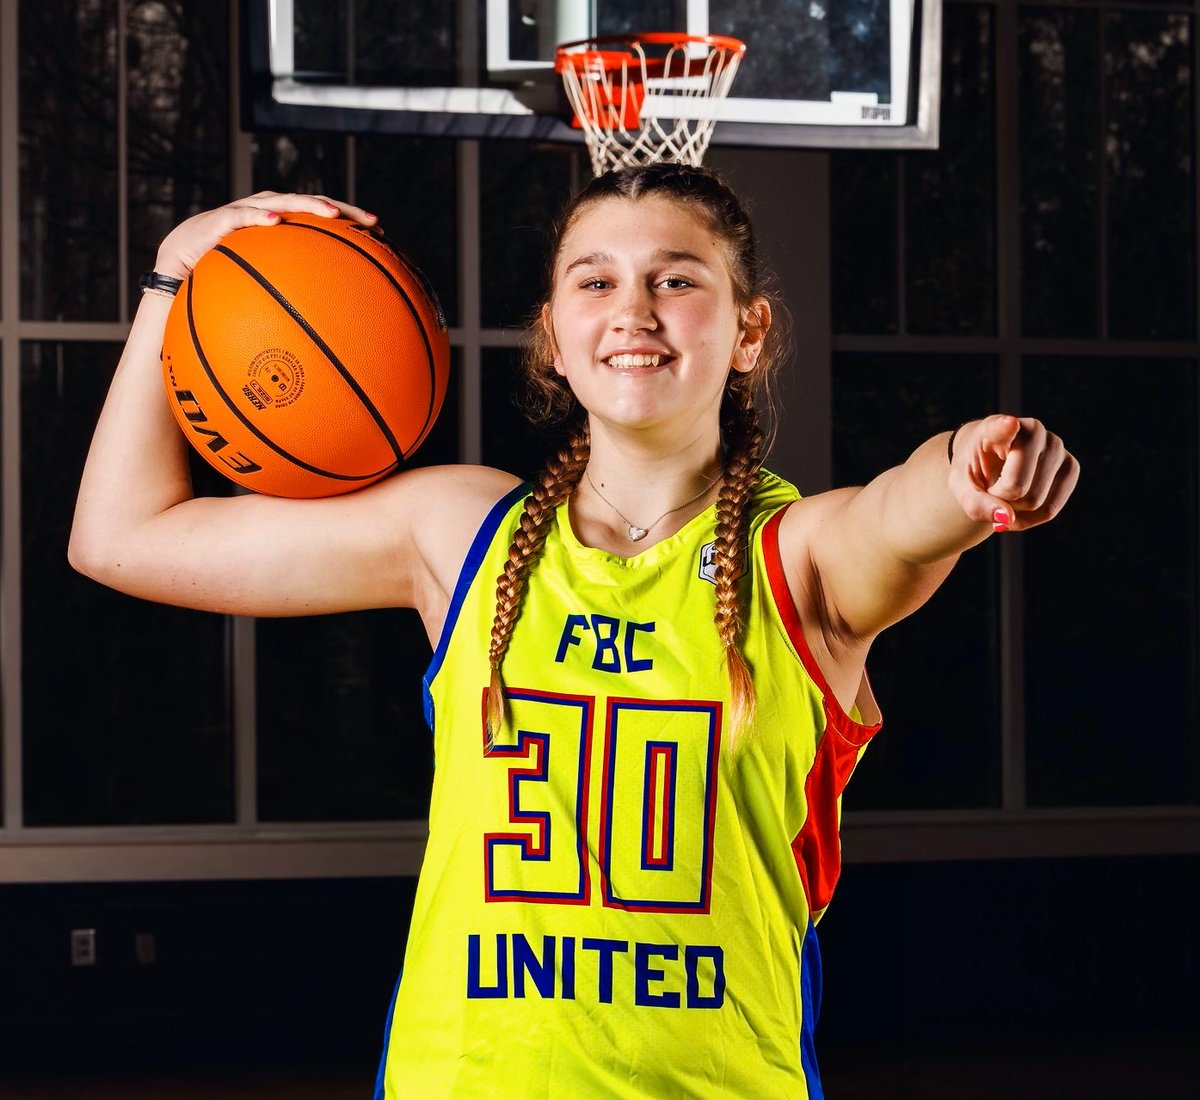 FBC United’s 2029 Carib Morris: This is how we roll! Click here: bit.ly/3Q4PffS Want to know the story of one of the most talented 6-2 shooting guards that is a 7th grader? Erik Woods has the scoop. @CaribMorris @FBCMotton @KYP212 @pop_scout